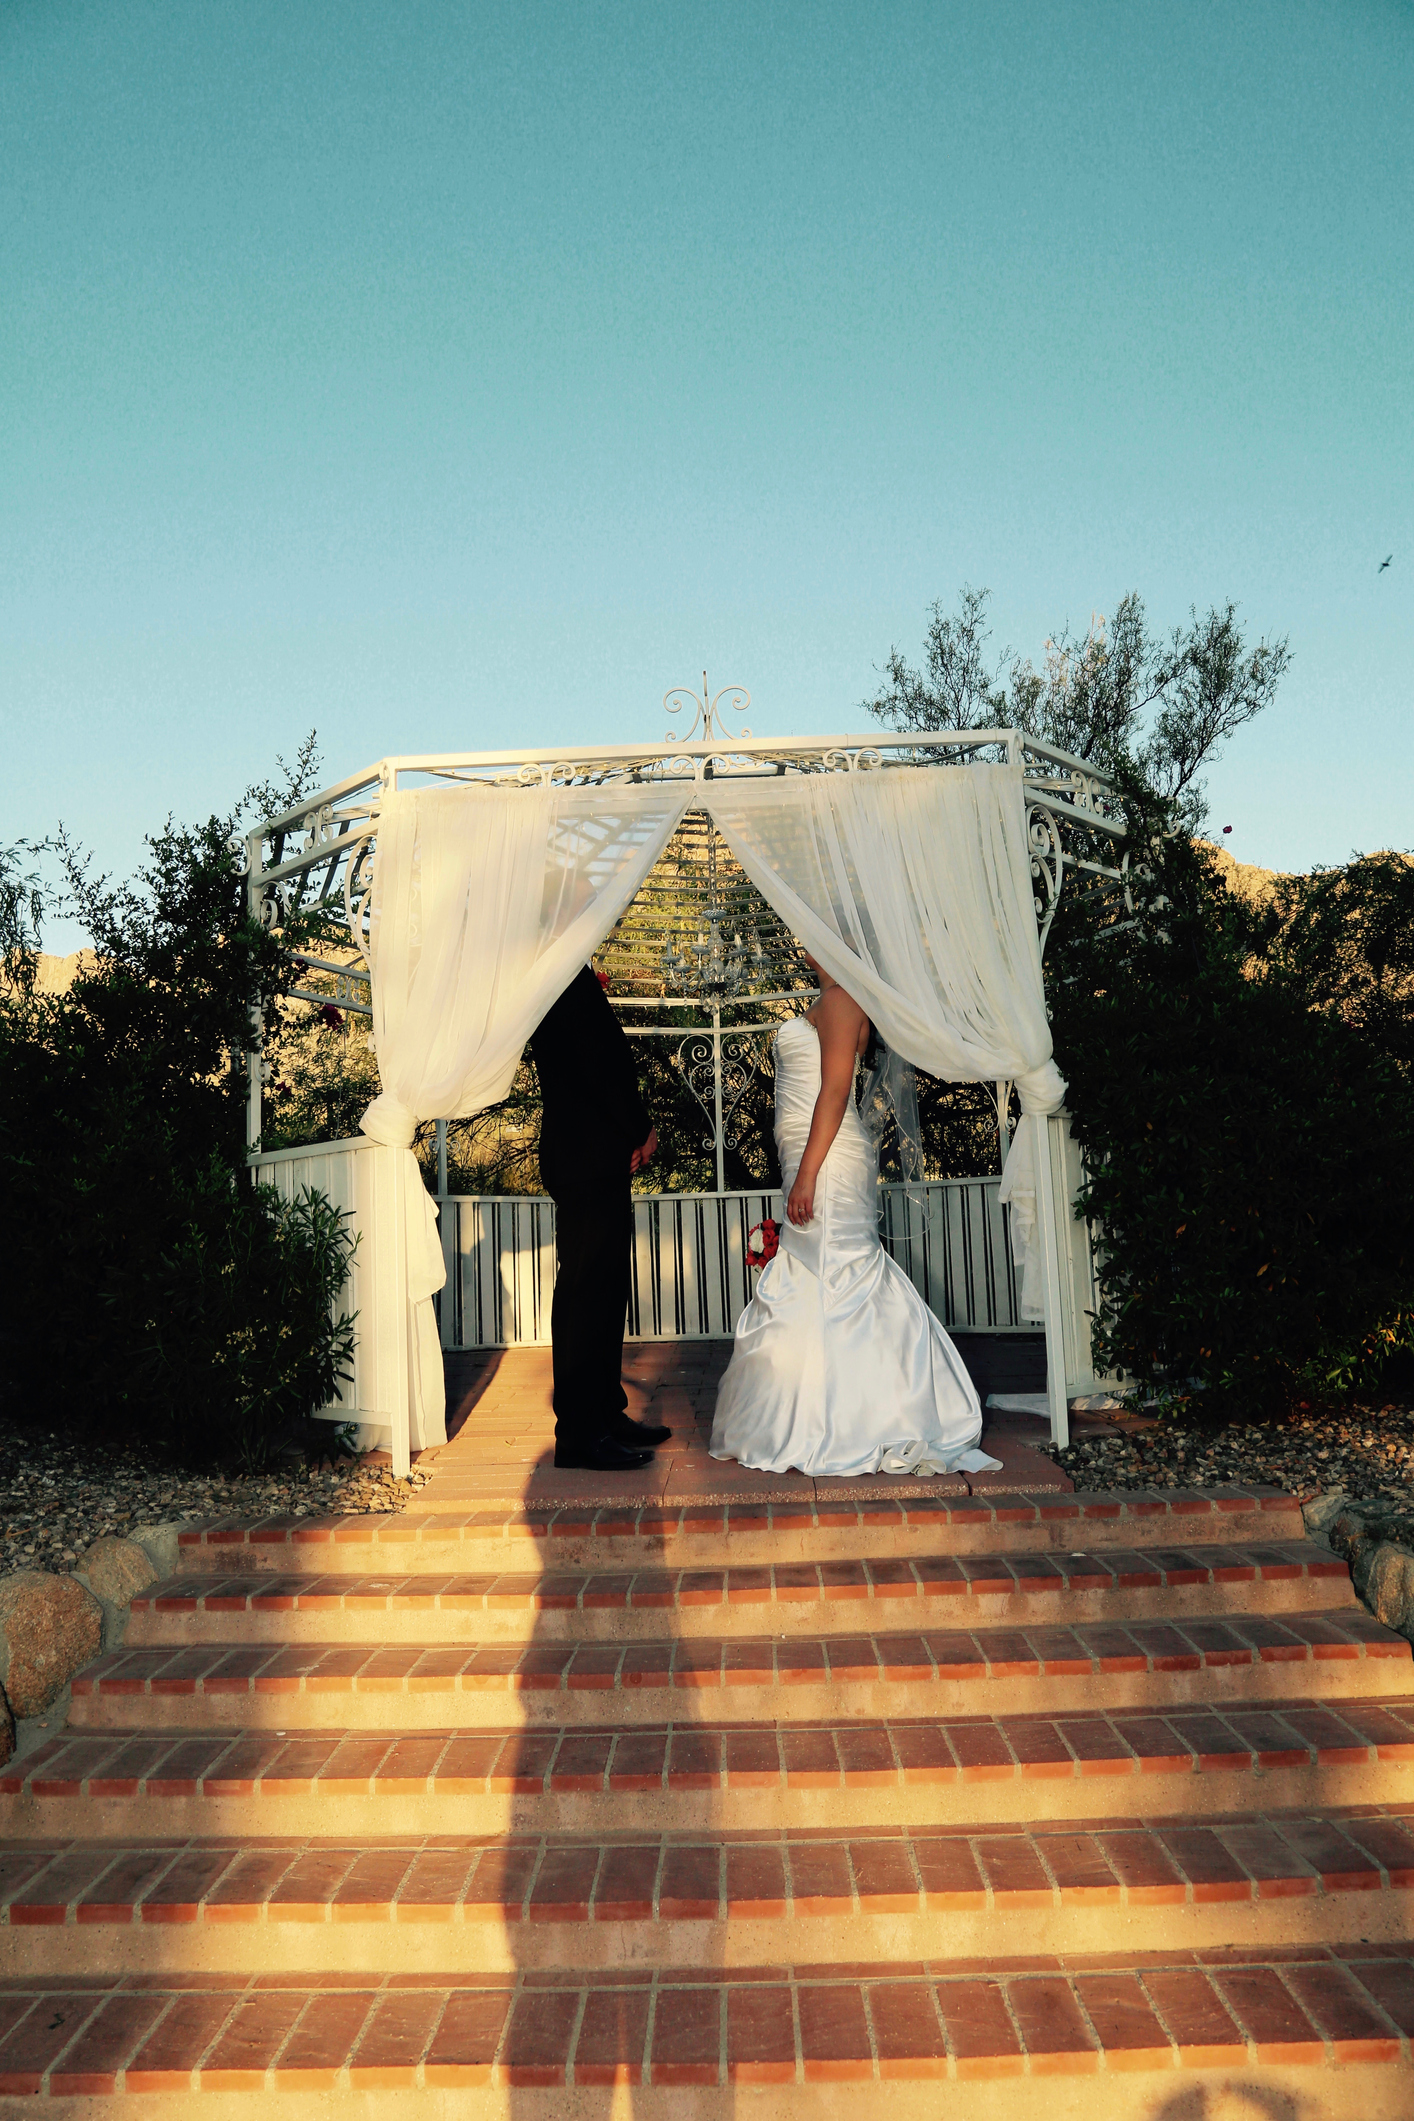 Bride and groom in a gazebo, faces behind curtains